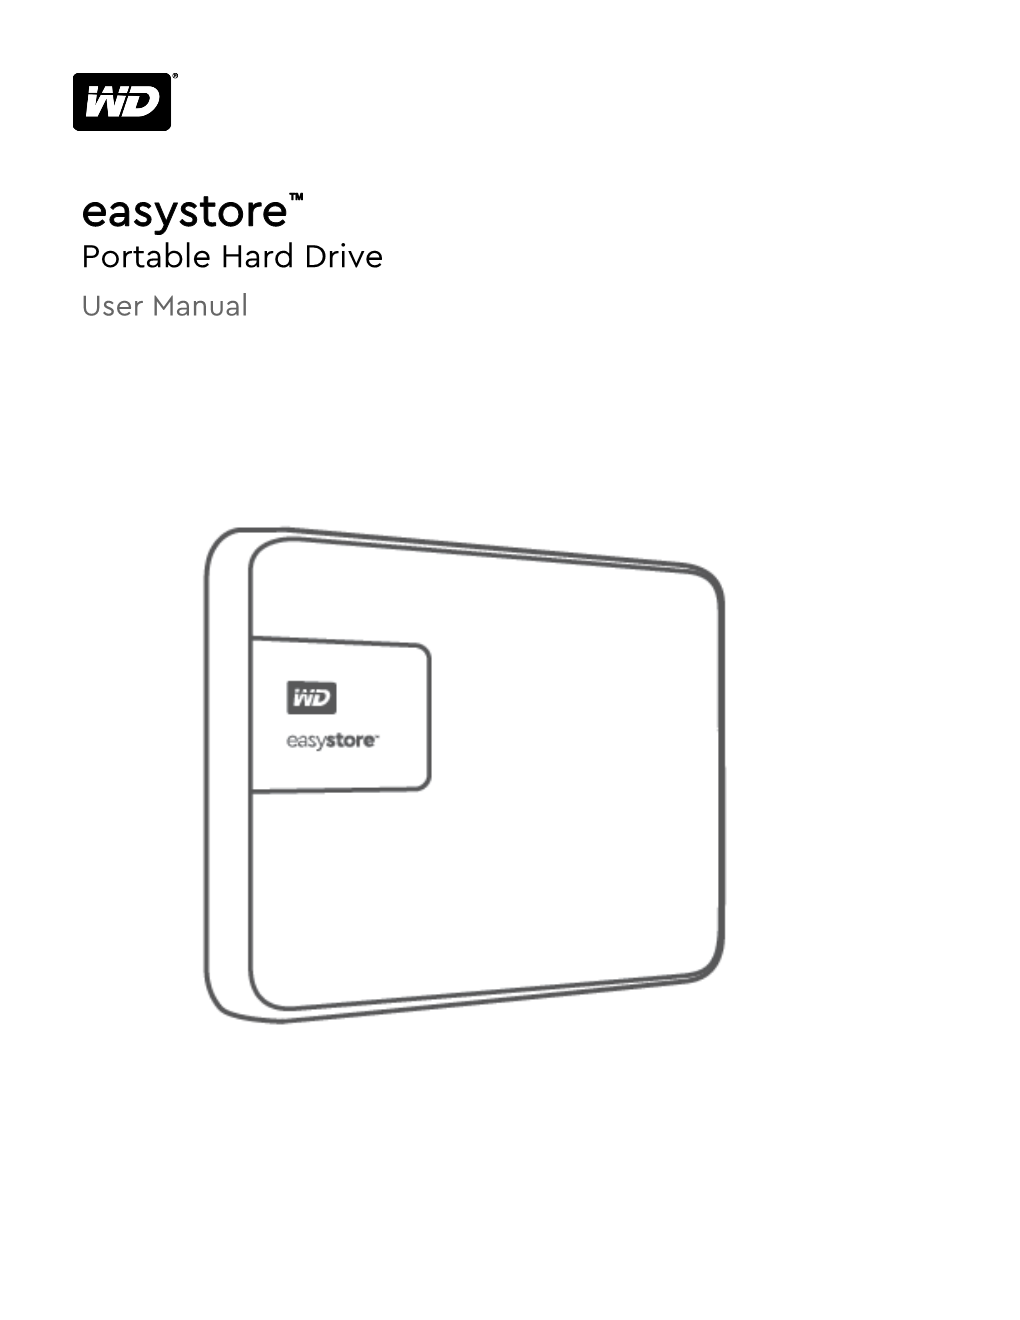 Easystore™ Portable Hard Drive User Manual Accessing Online Support